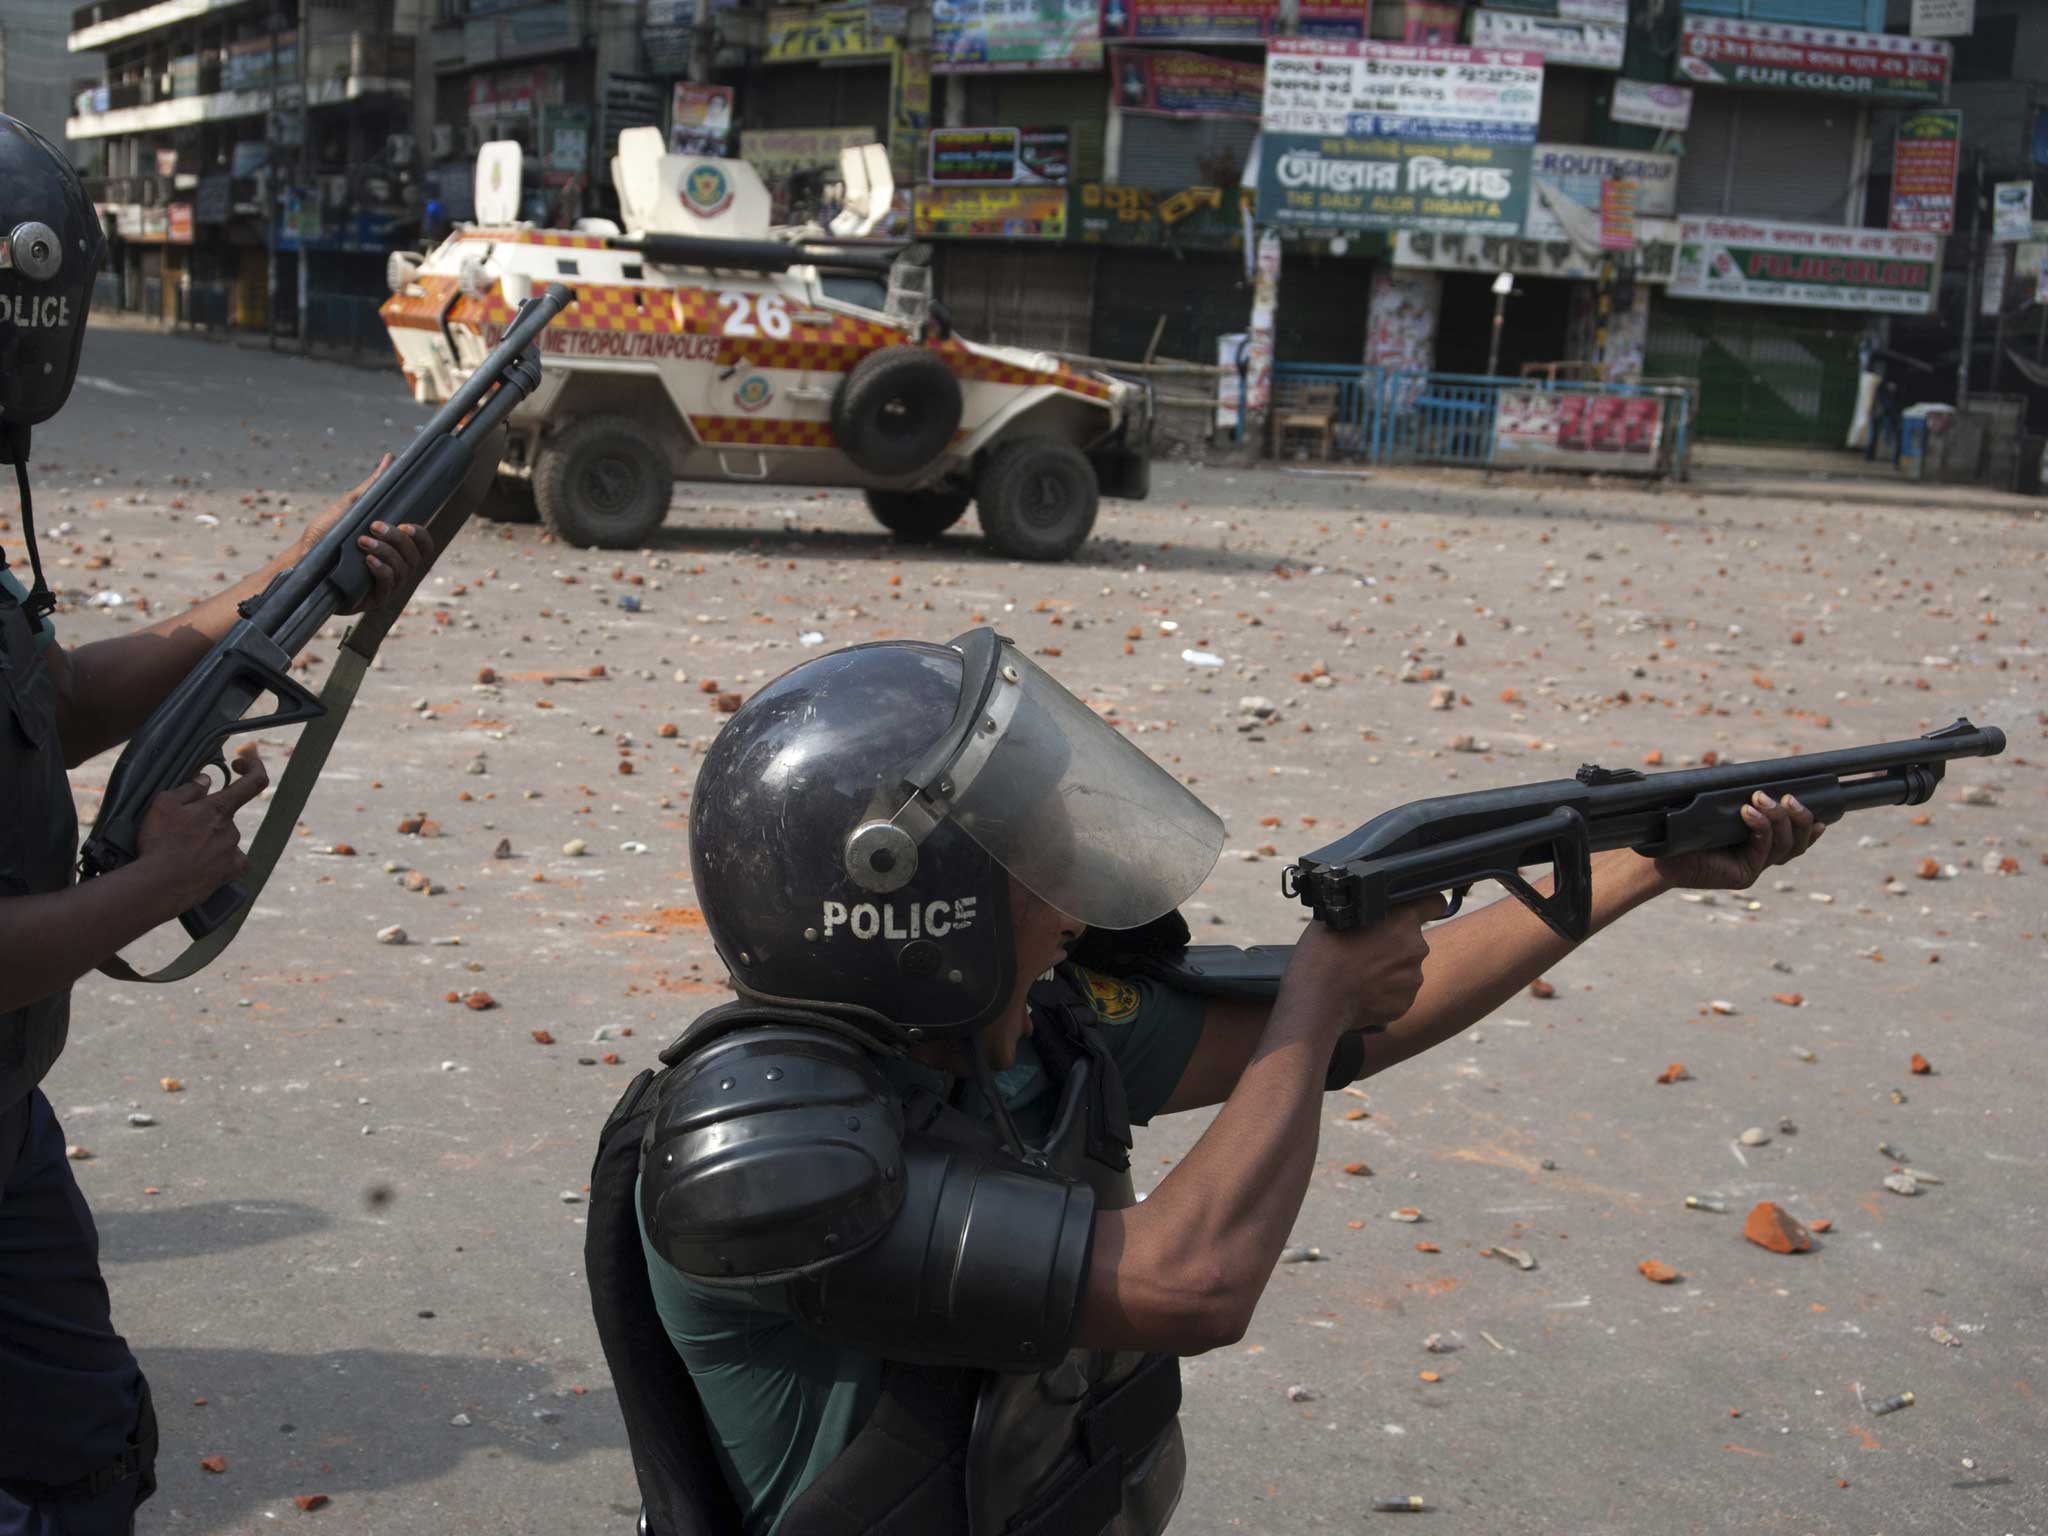 Policemen aim at protesters on a street in Dhaka